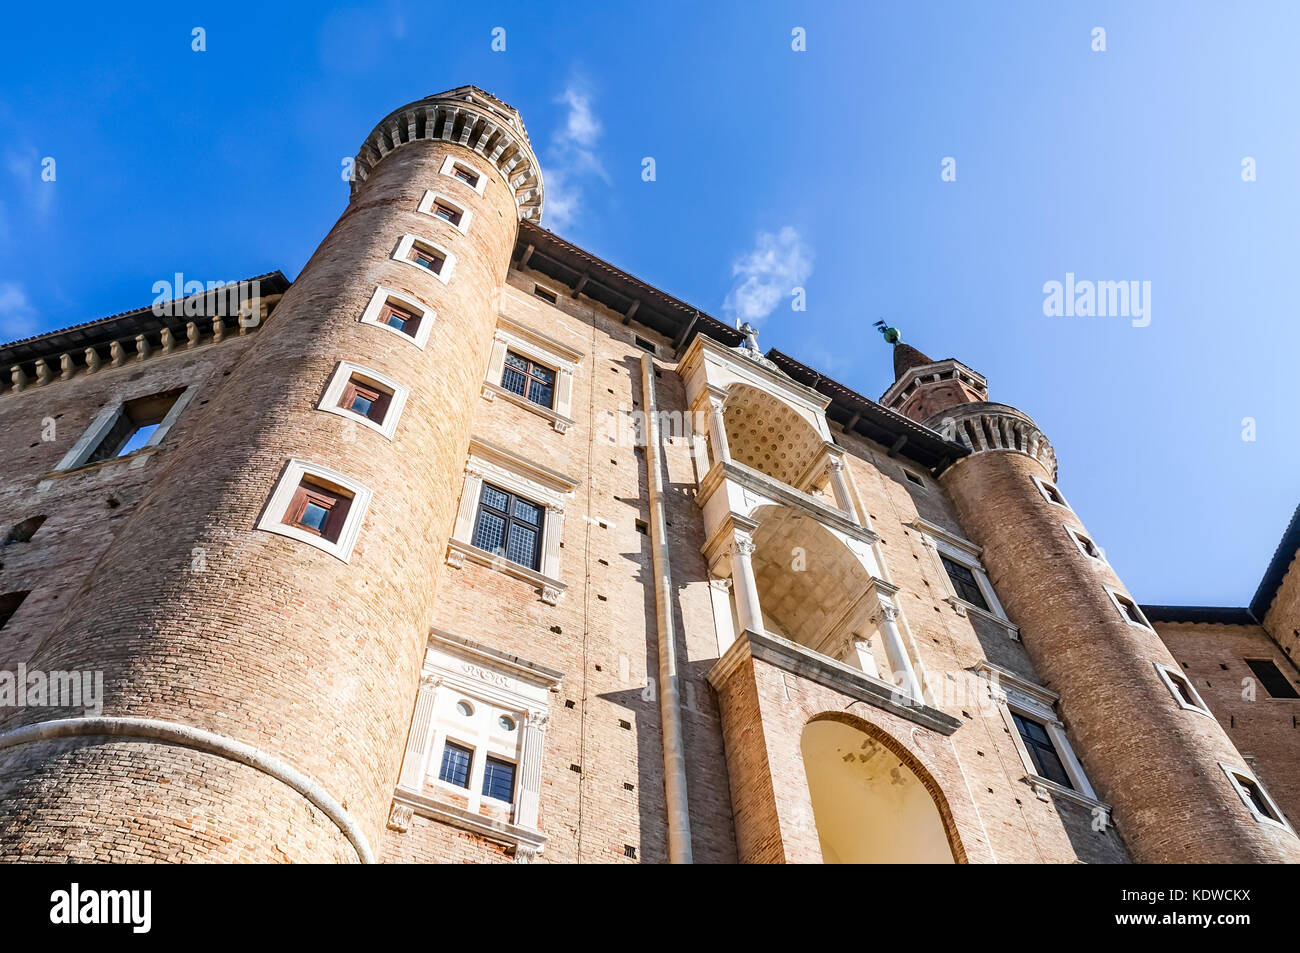 The renaissance town of Urbino, Marche, Italy. A view from down of the Ducale Palace (Palazzo Ducale) in Urbino city, Marche, Italy Stock Photo